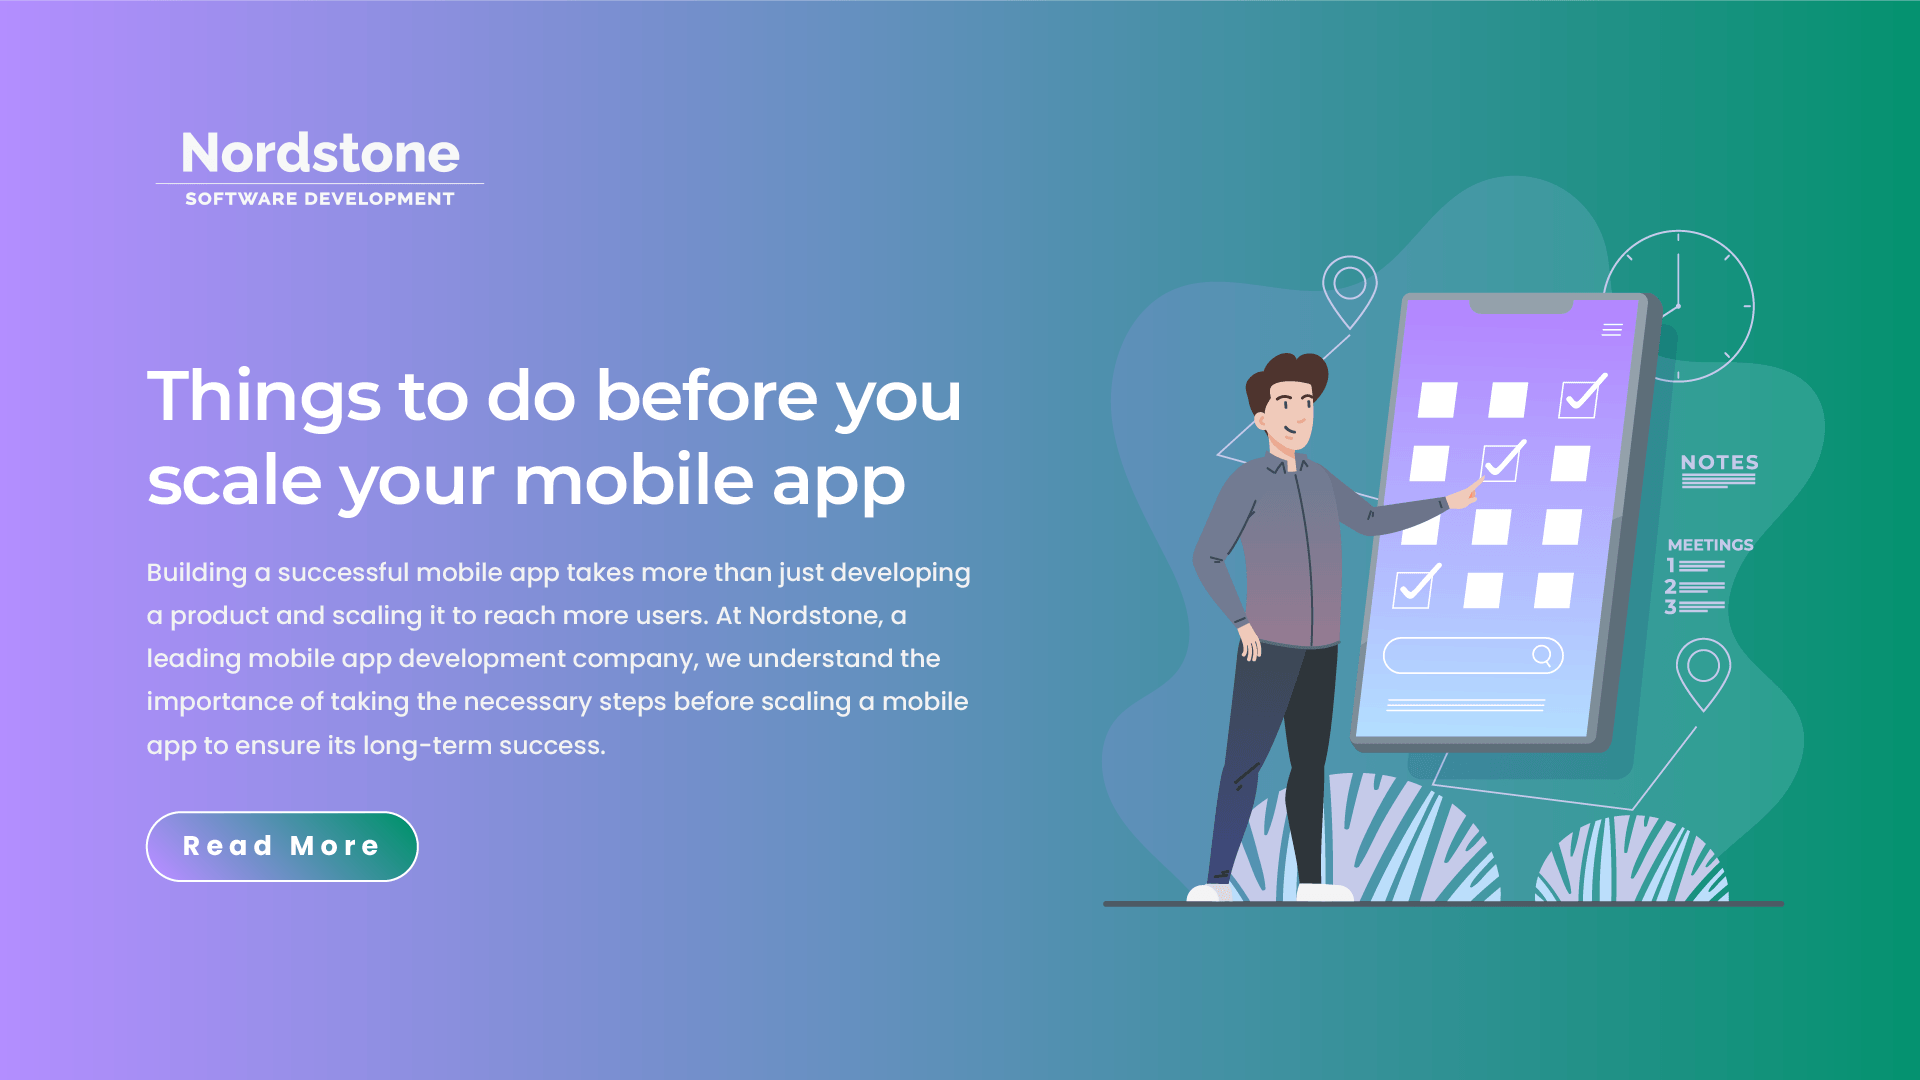 Things to do before you scale your mobile app